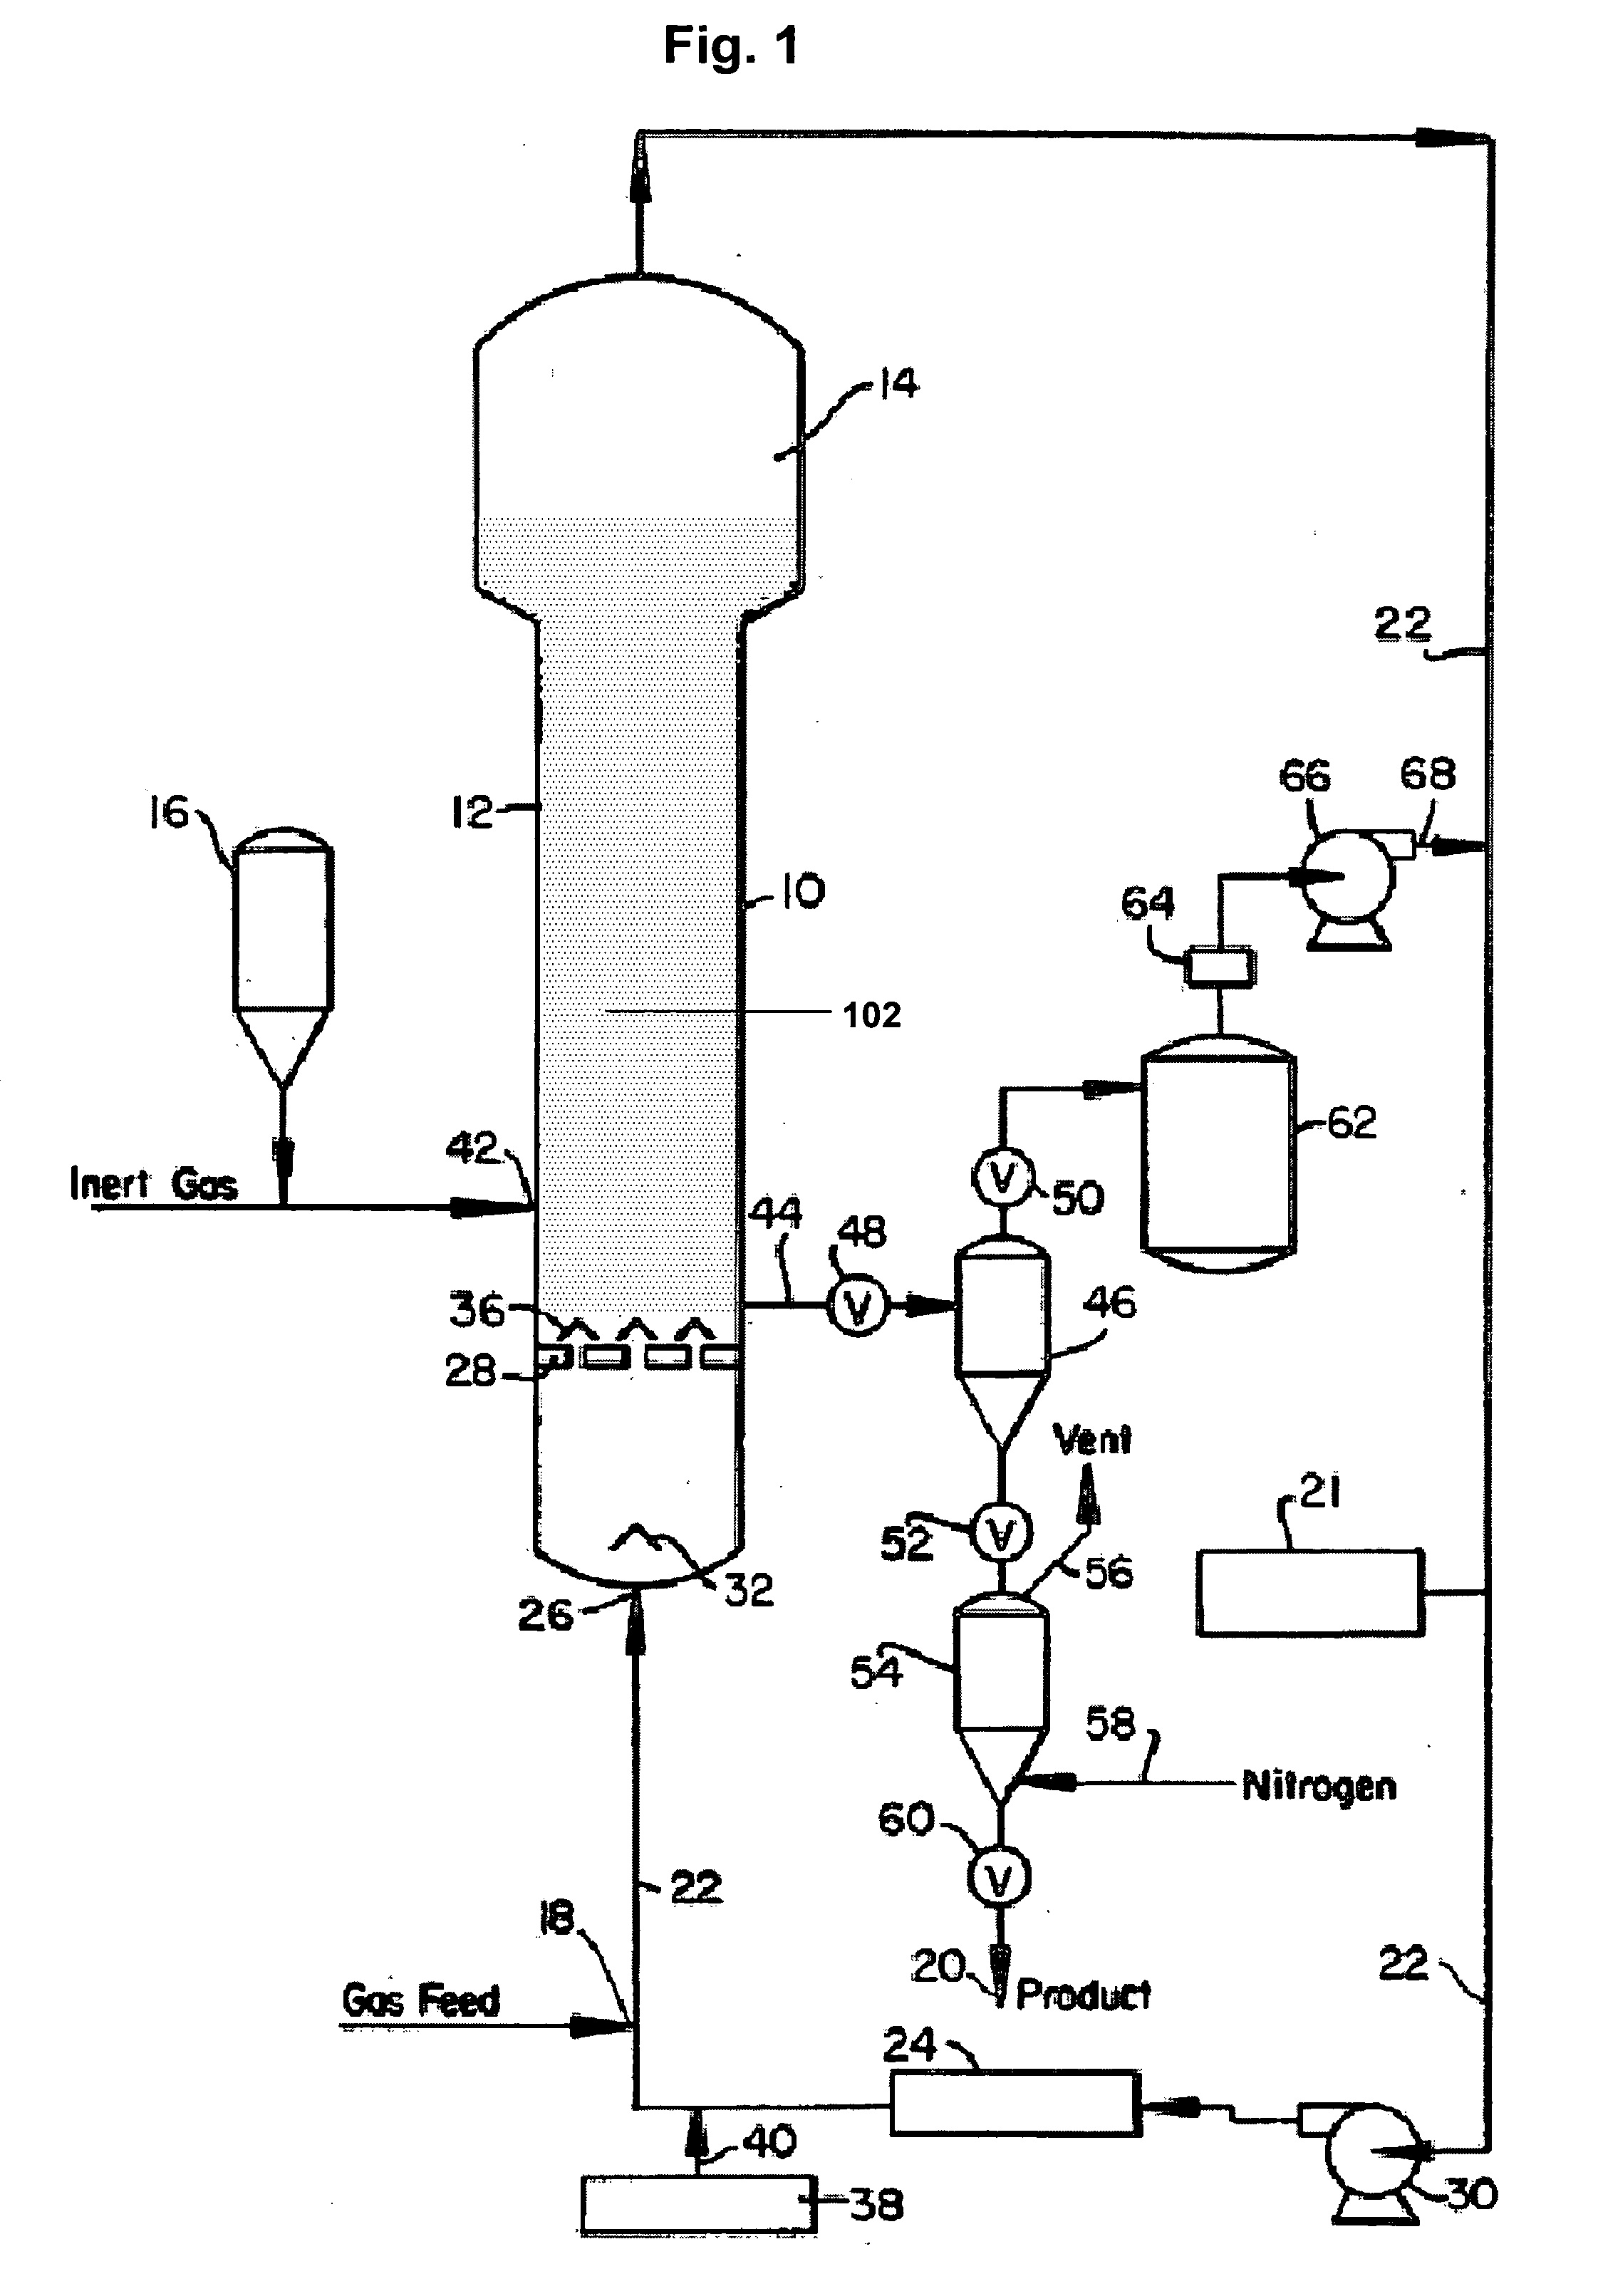 Condensing mode operation of gas-phase polymerization reactor